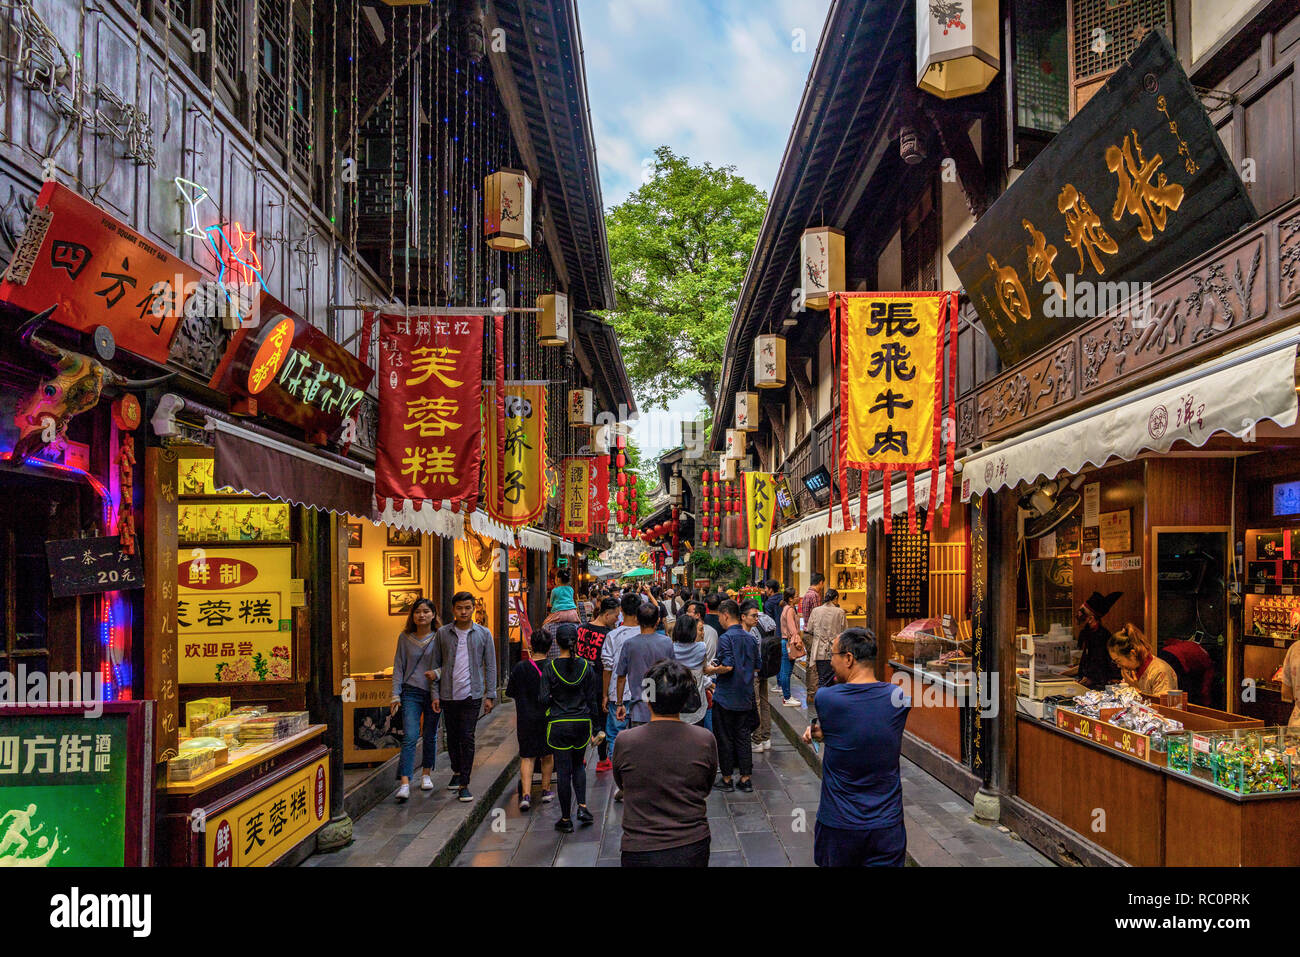 CHENGDU, CHINA - SEPTEMBER 25: Traditional Chinese alley with shops and stals at Jinli Ancient Street on September 25, 2018 in Chengdu Stock Photo